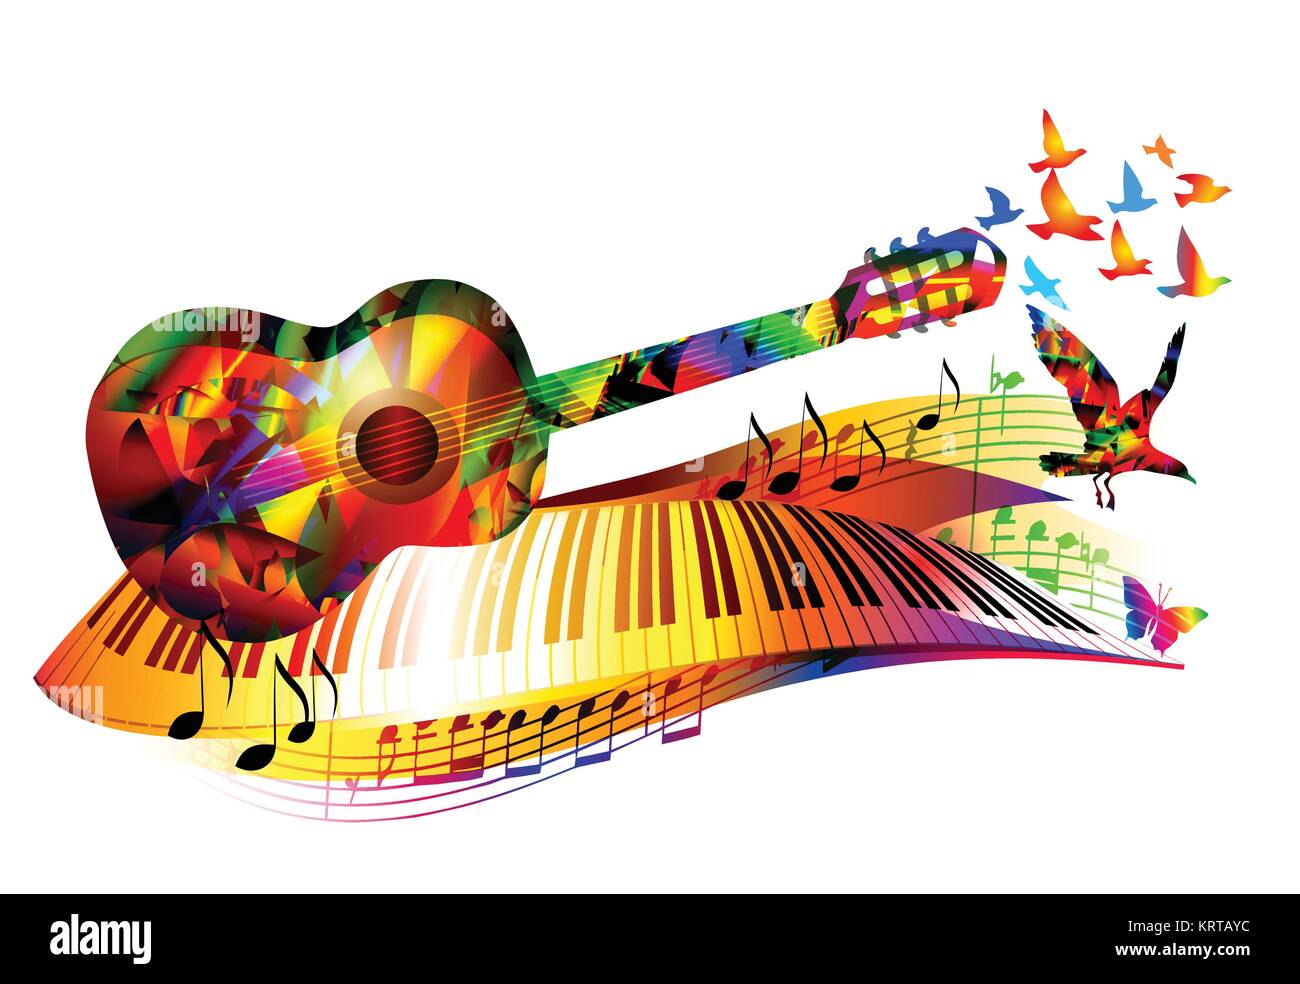 Colorful music background with guitar, piano keyboard, flying birds and music notes Stock Vector